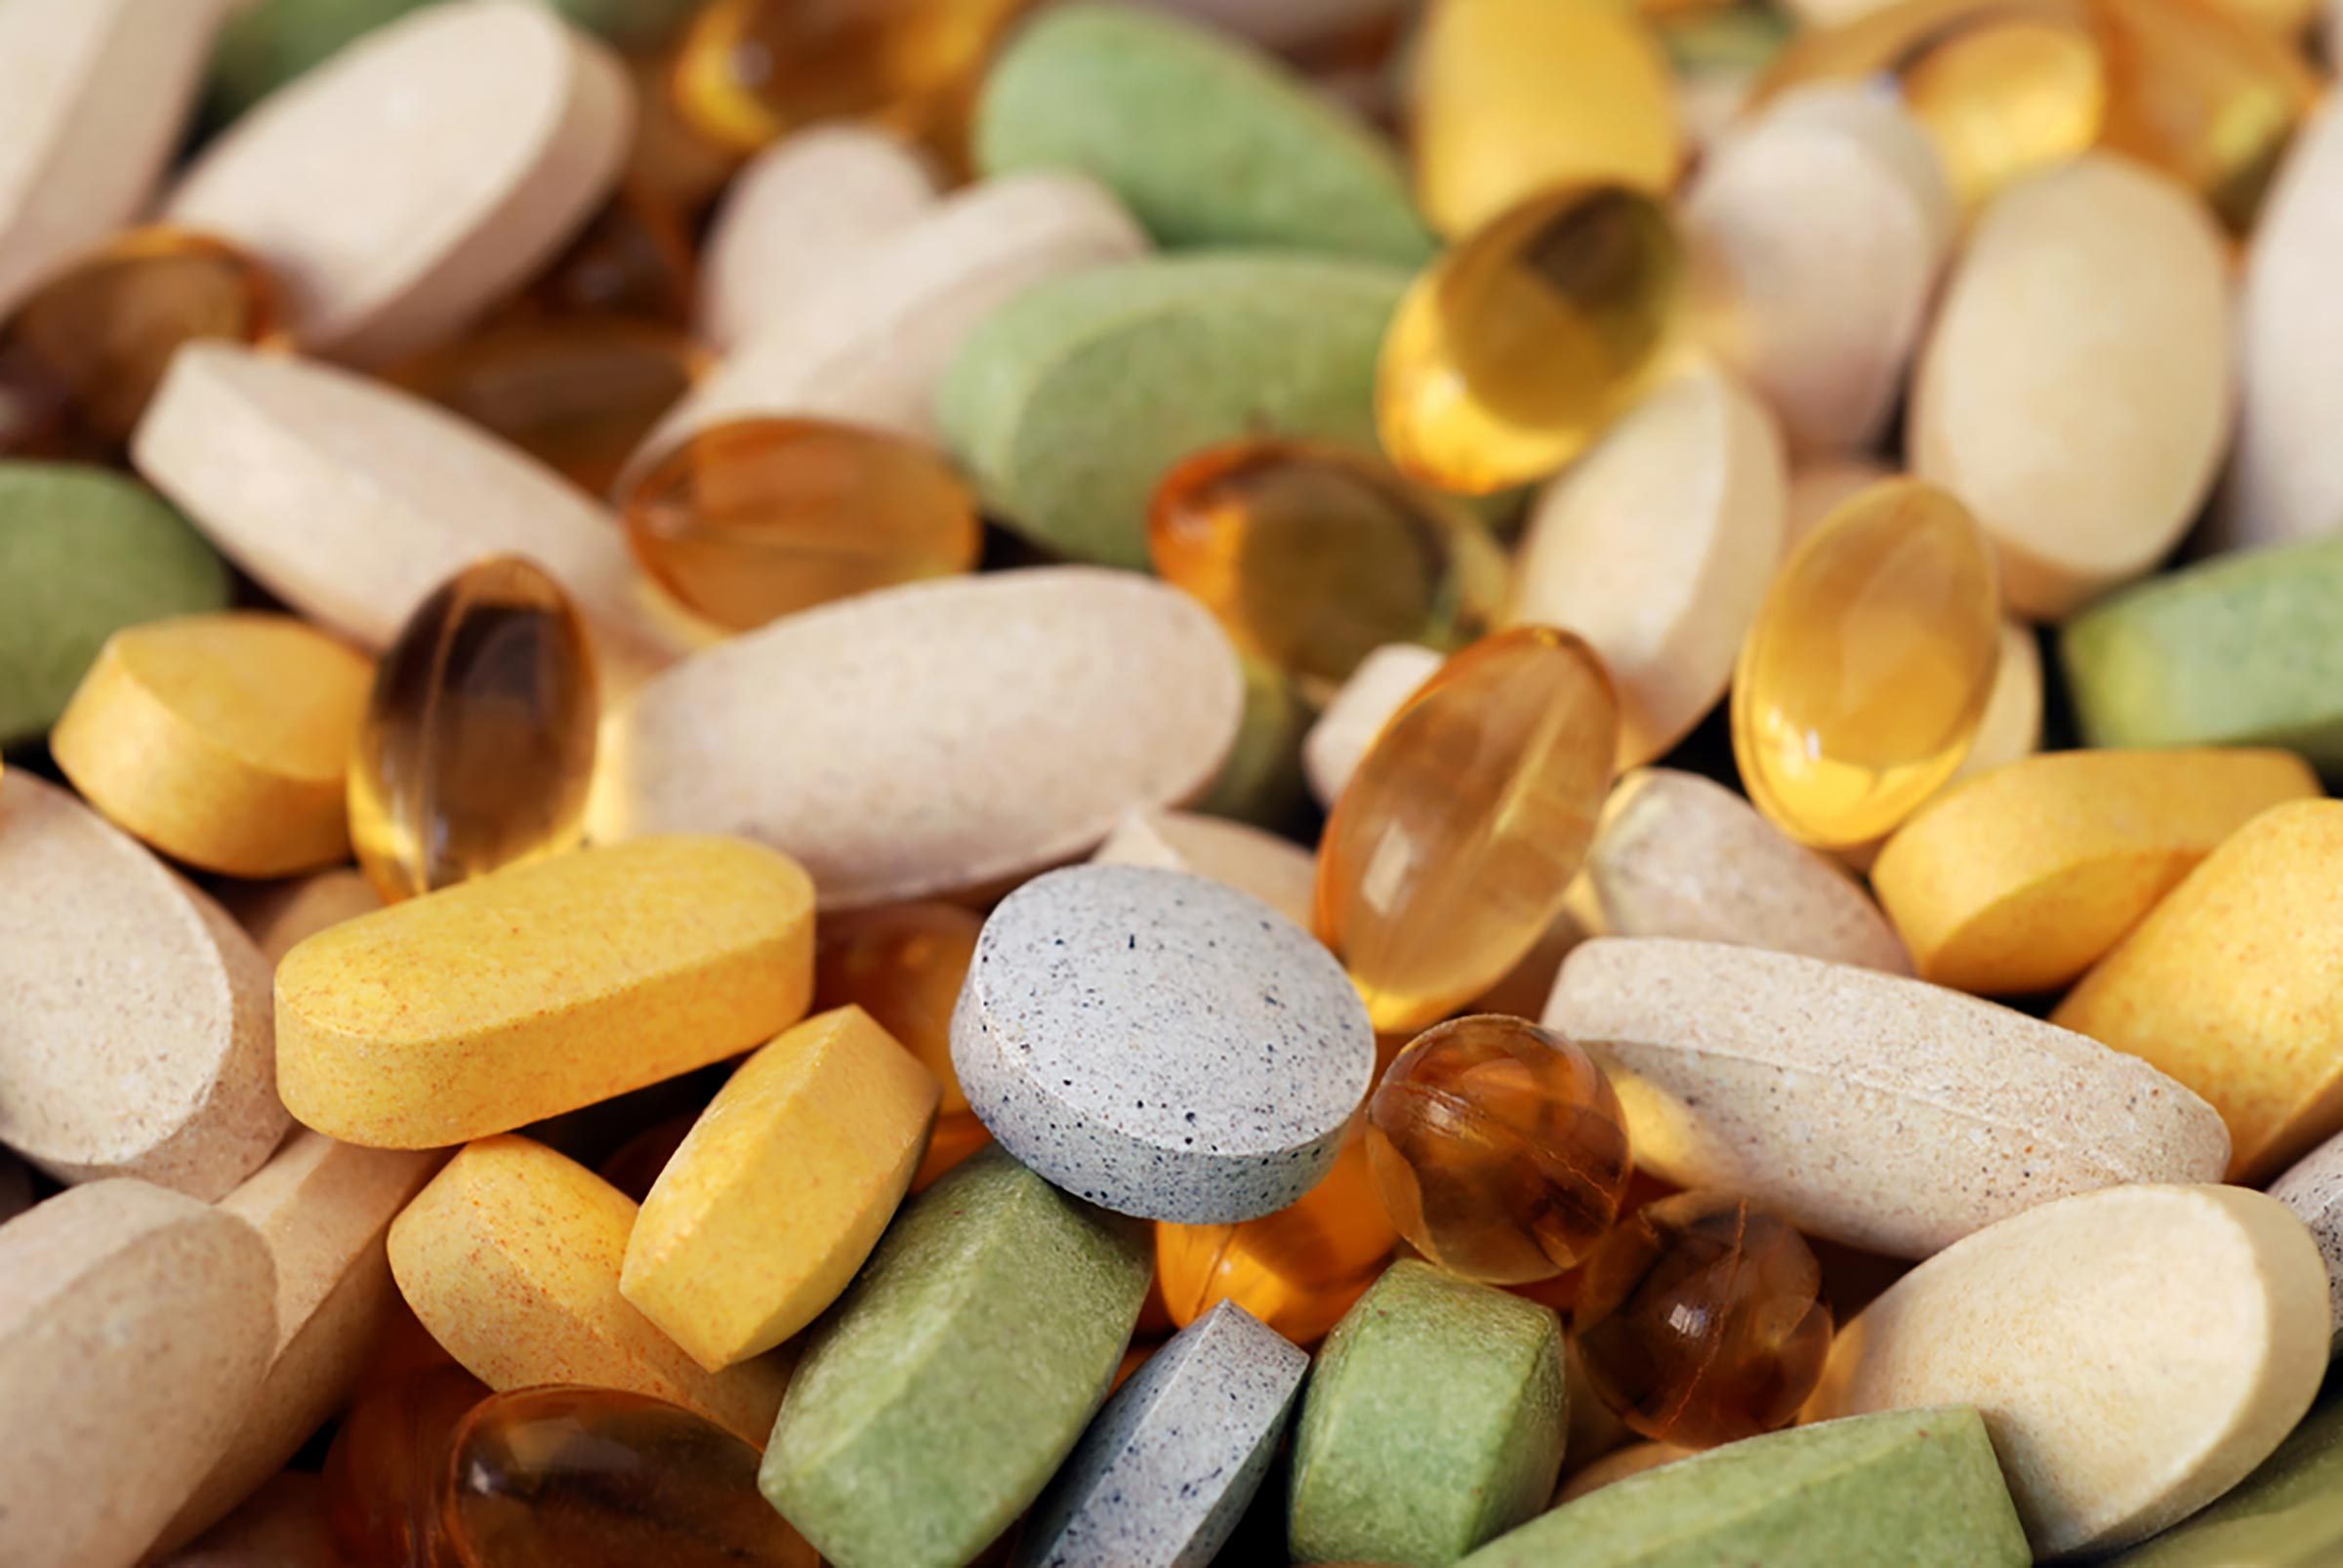 14 Simple Ways to Make Your Vitamins More Effective